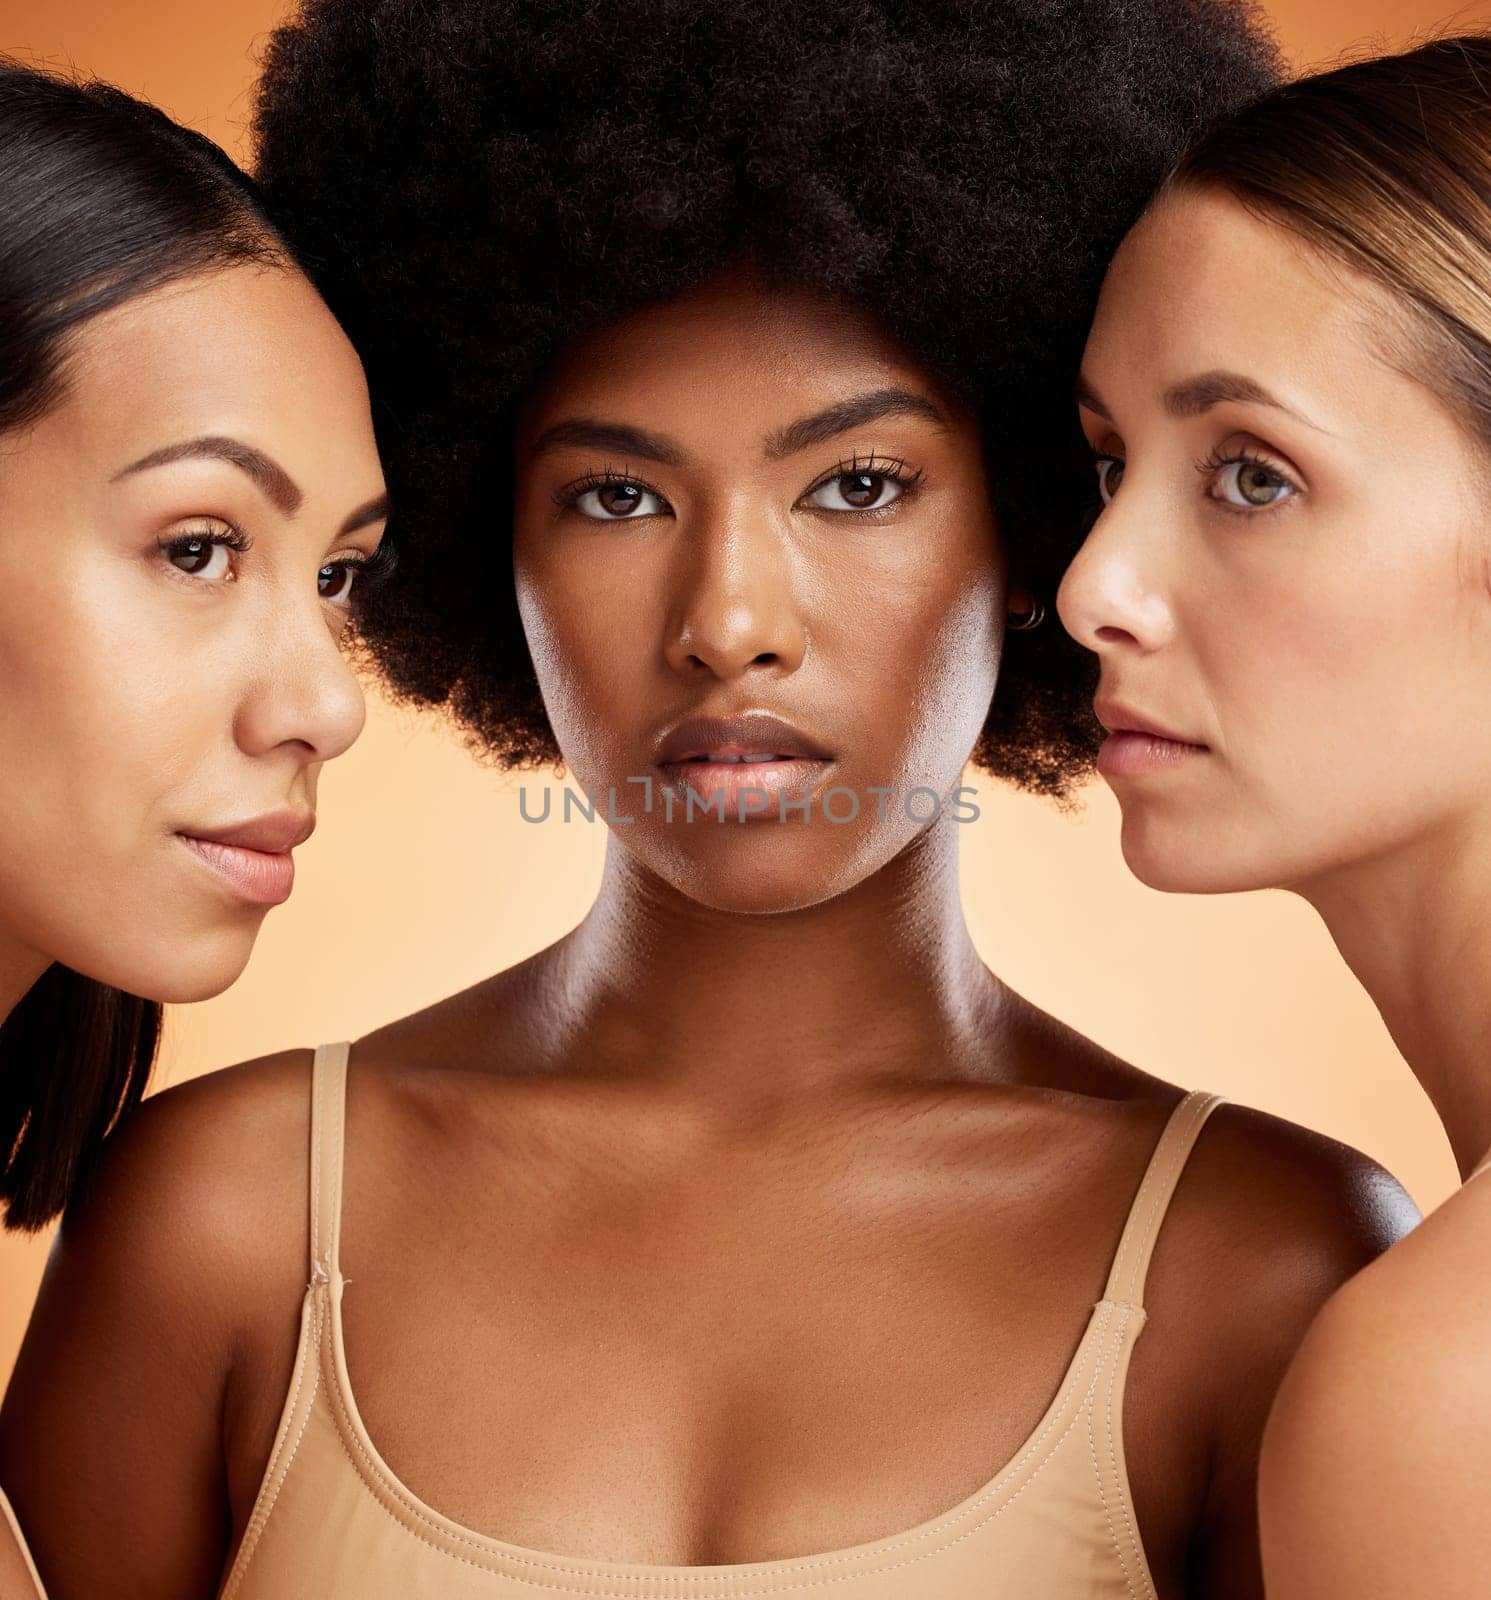 Beauty, skincare and diversity with model woman in studio on an orange background to promote a wellness product. Cosmetics, face and portrait of a female friends group posing for health and care.